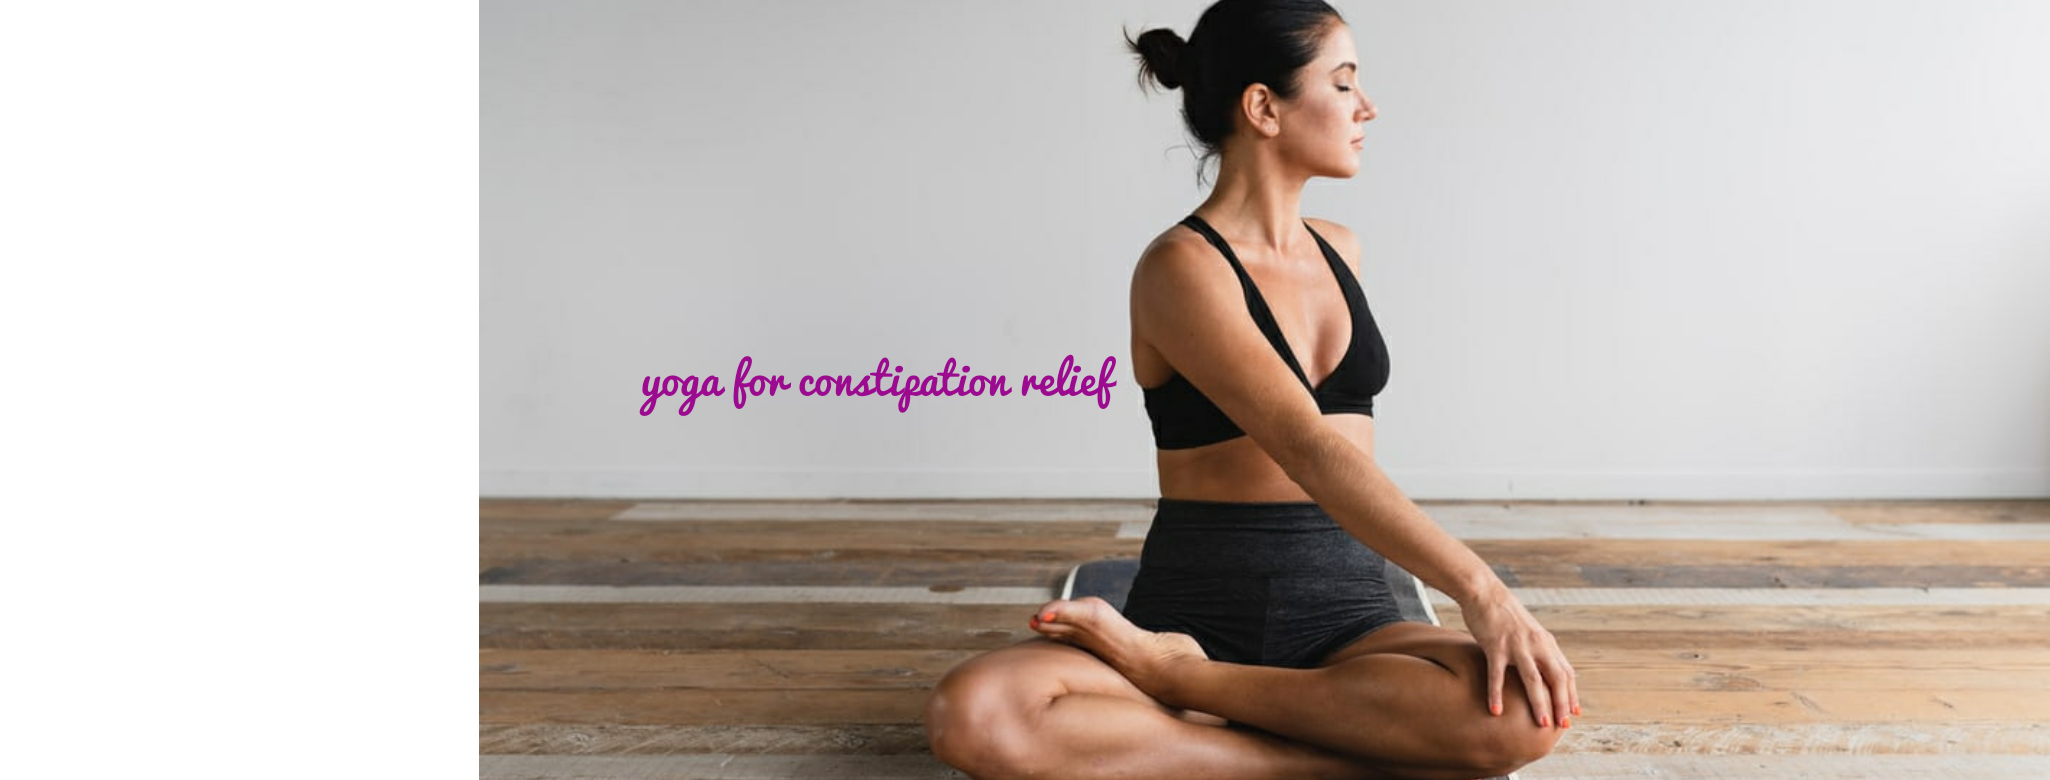 Yoga for Constipation: Easy Poses to Improve Digestion - Sacredtribeyoga